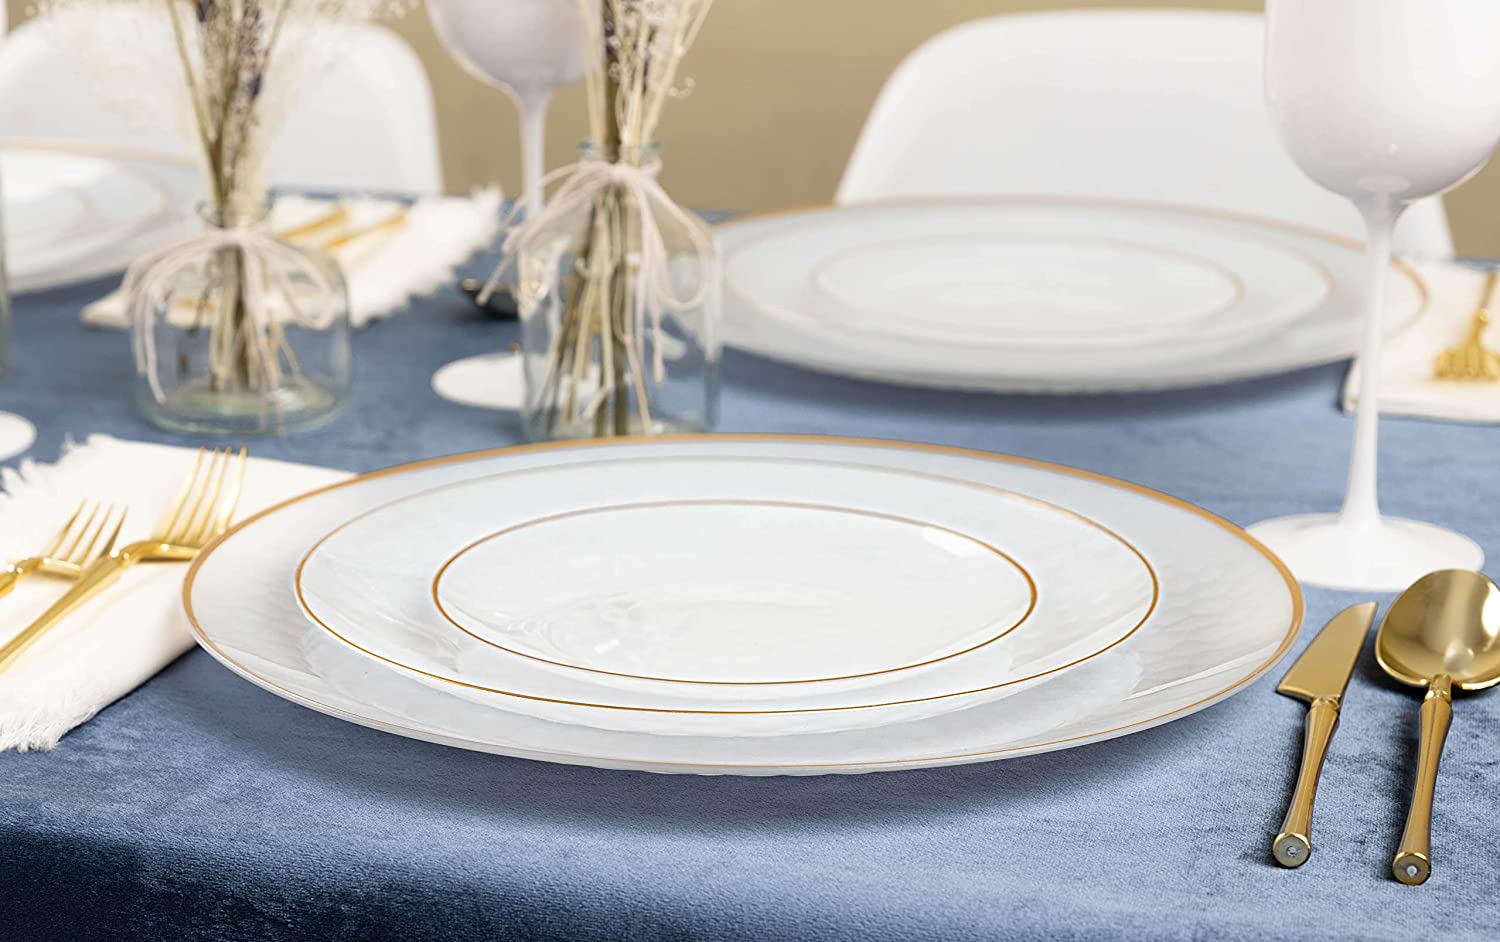 Plastic Tableware White Plates Gold Rim Hammered Transparent Organic Collection Dinner Party Set